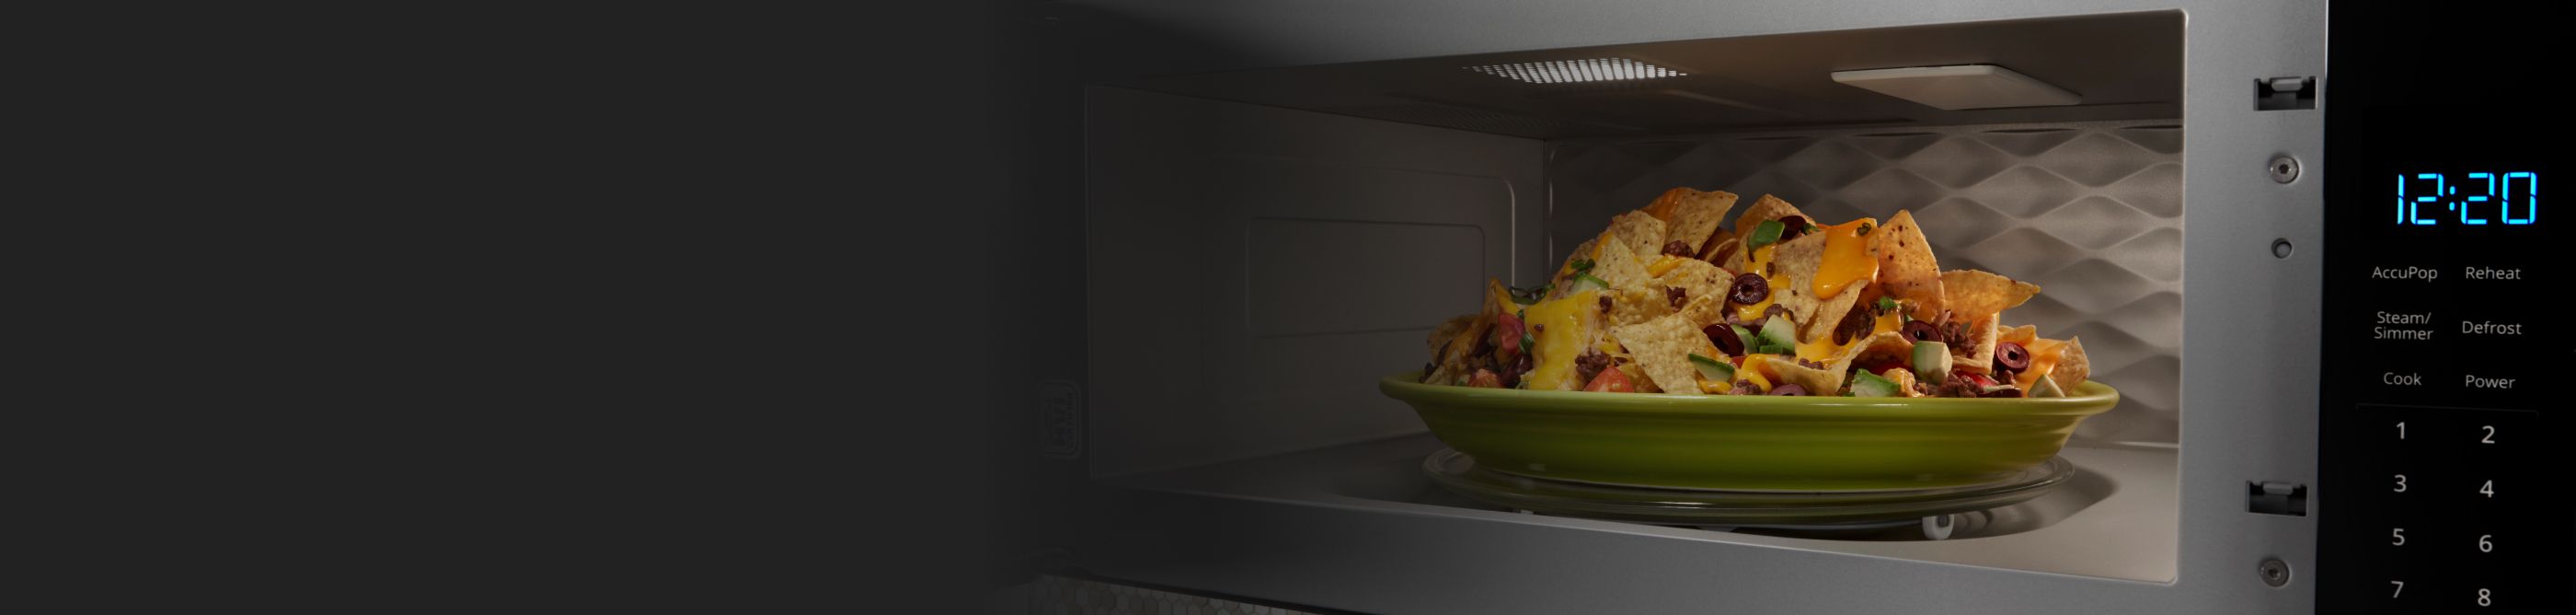 A plate of nachos in the microwave